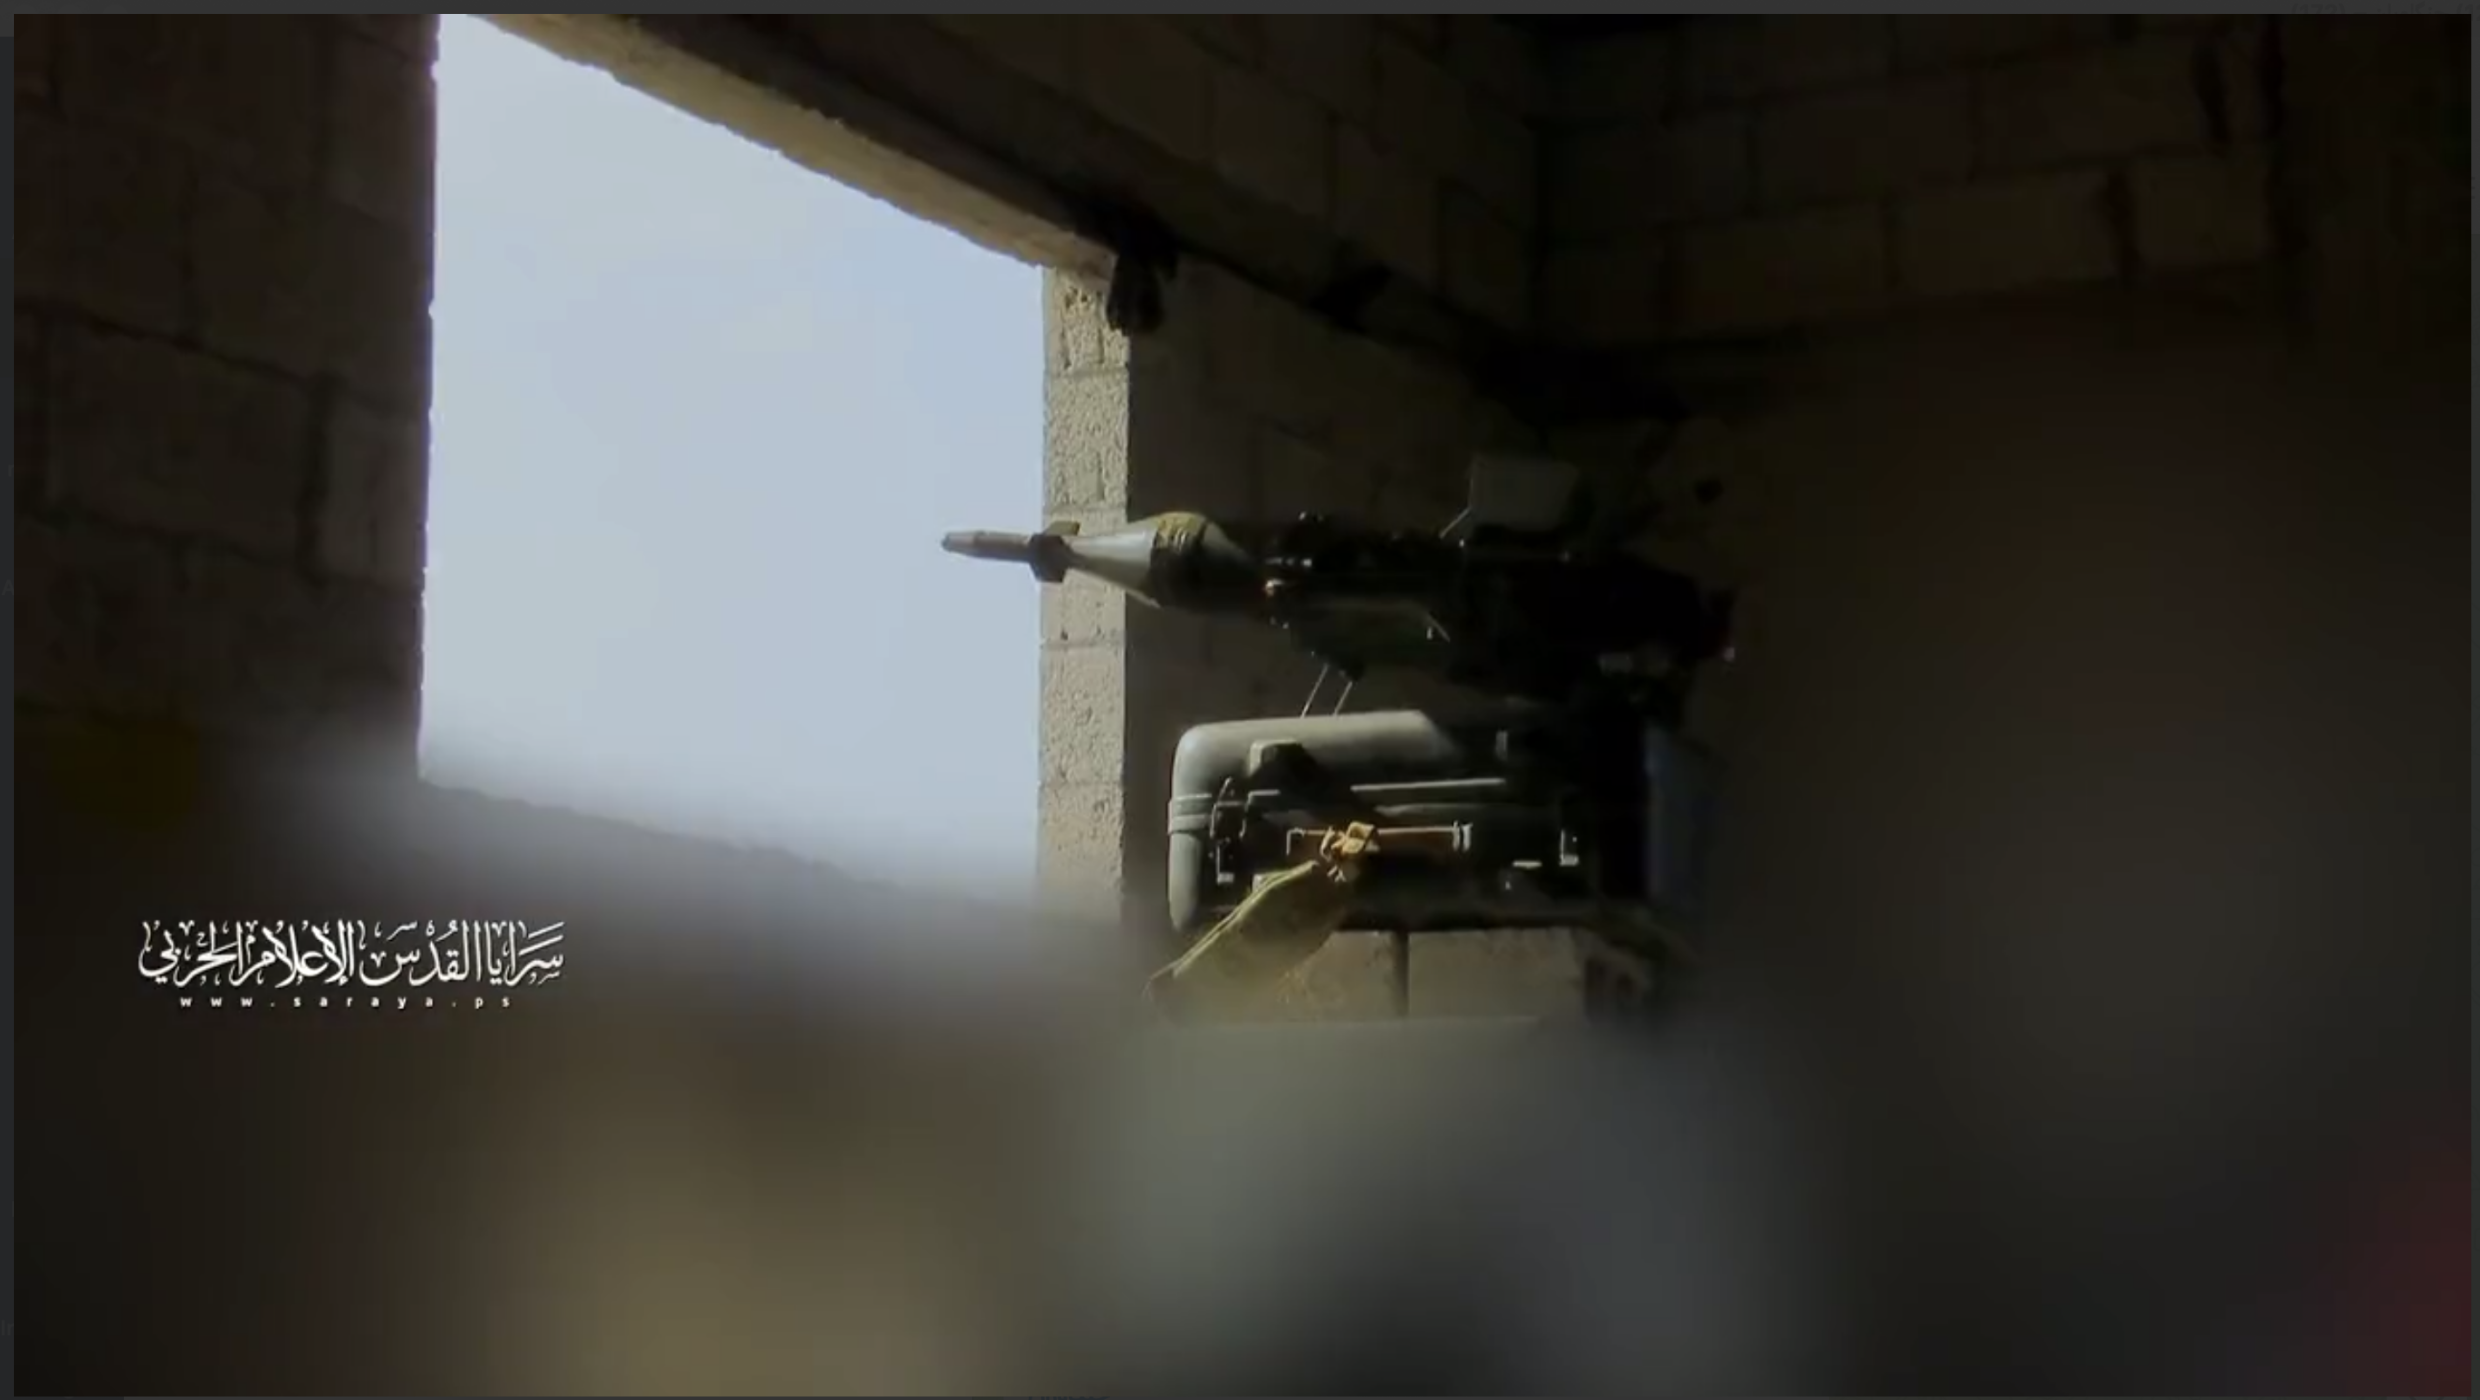 Ra’d-T, the Iranian version of the 9M14 Malyutka, an anti-tank guided missile developed in the Soviet Union. video published by Hamas on October 7.